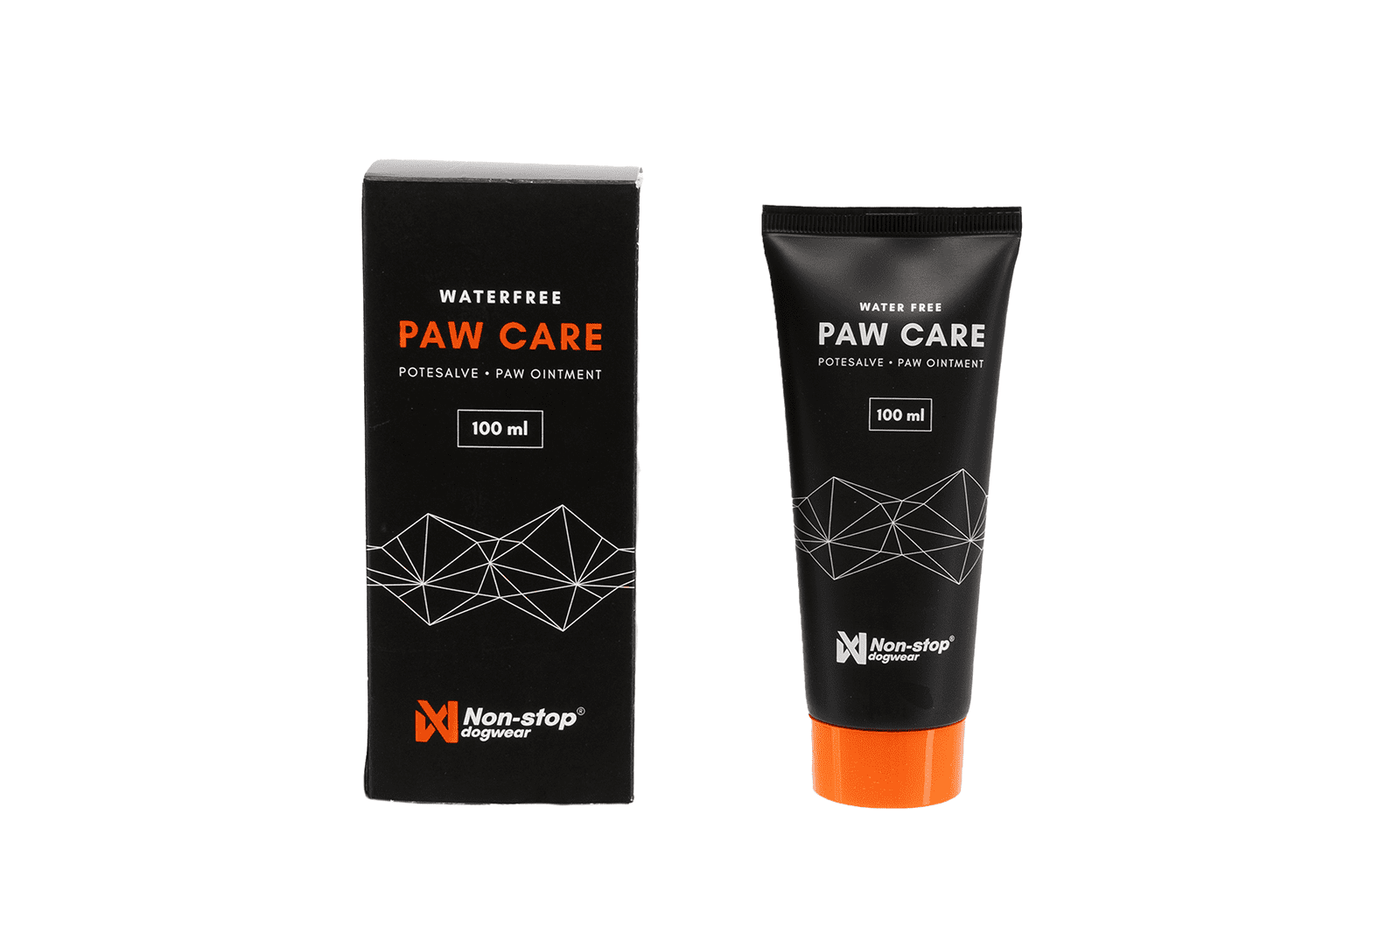 Non-stop dogwear Paw care